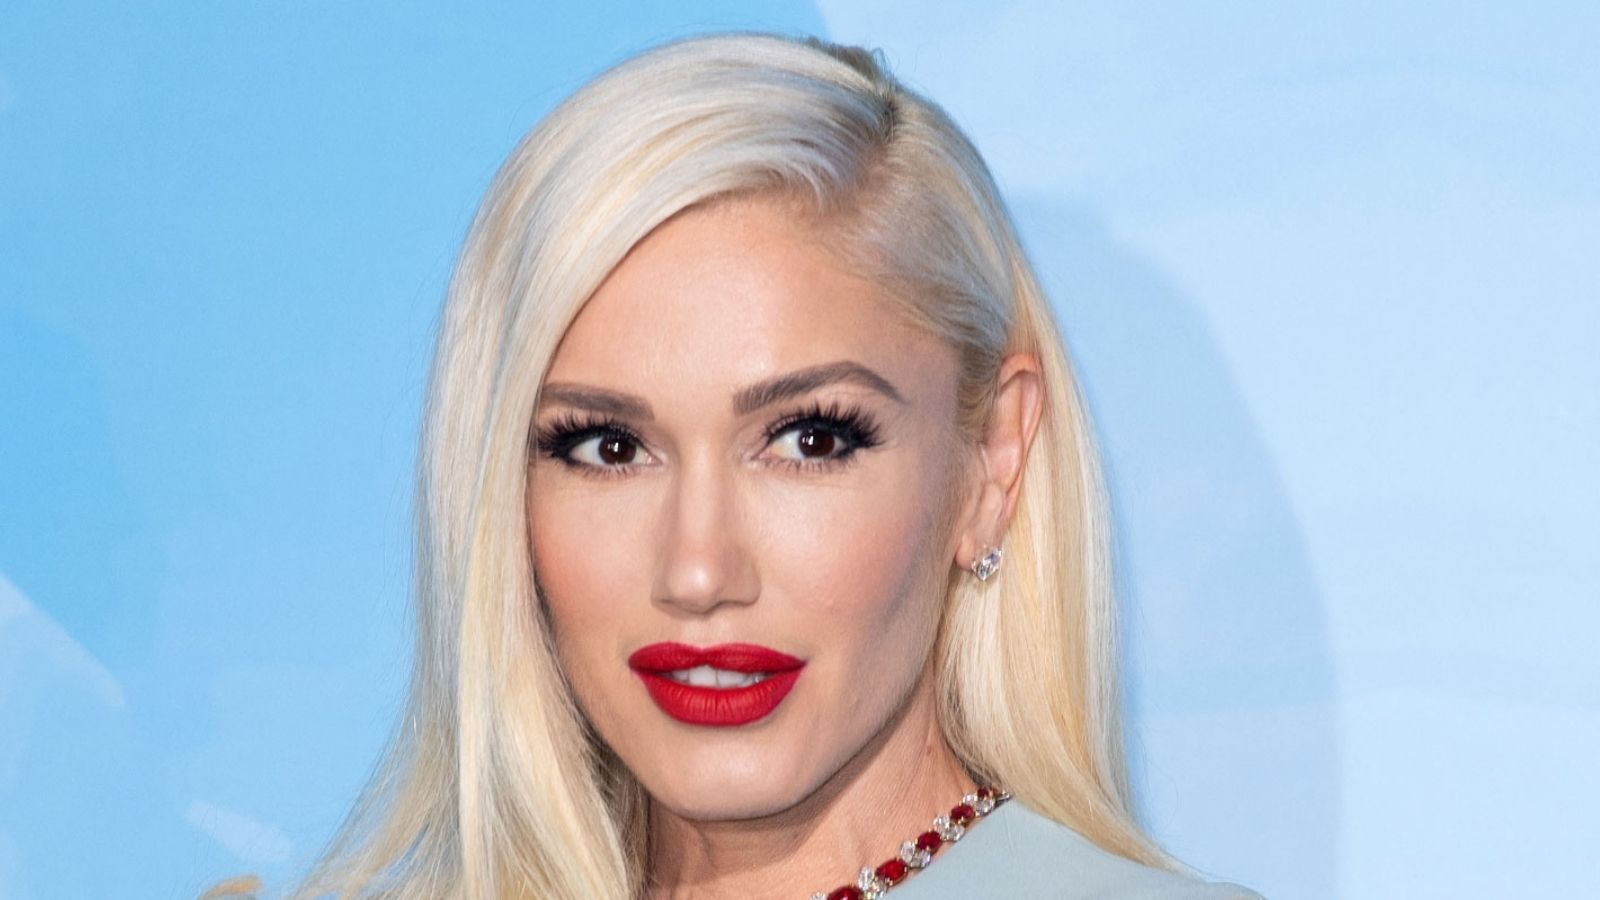 Here’s How Gwen Stefani Started & Grew Her Multi-Million Dollar Clothing Line ‘L.A.M.B’